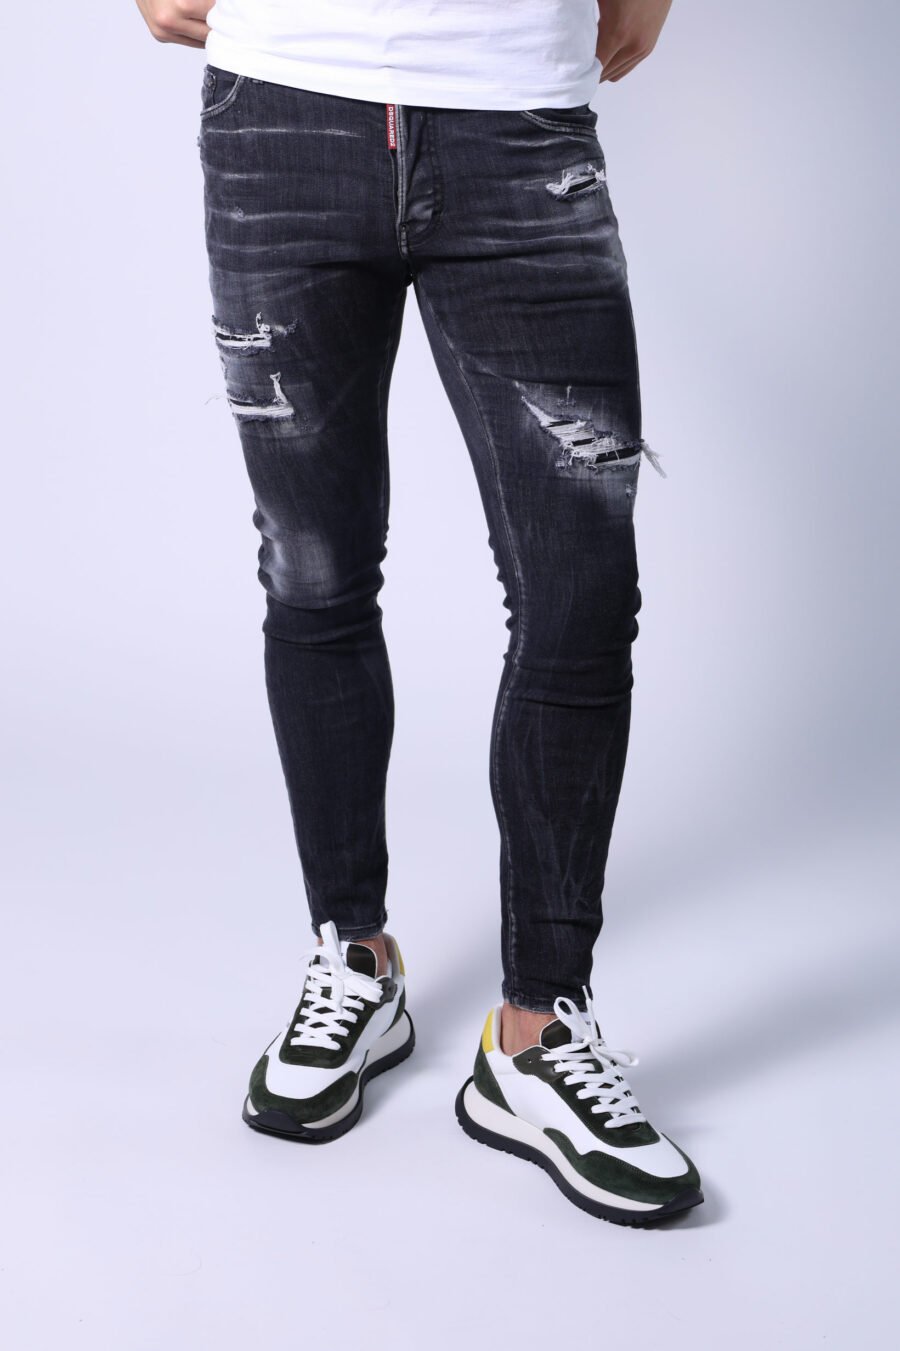 Skater jean trousers black with rips and semi-worn - Untitled Catalog 05316